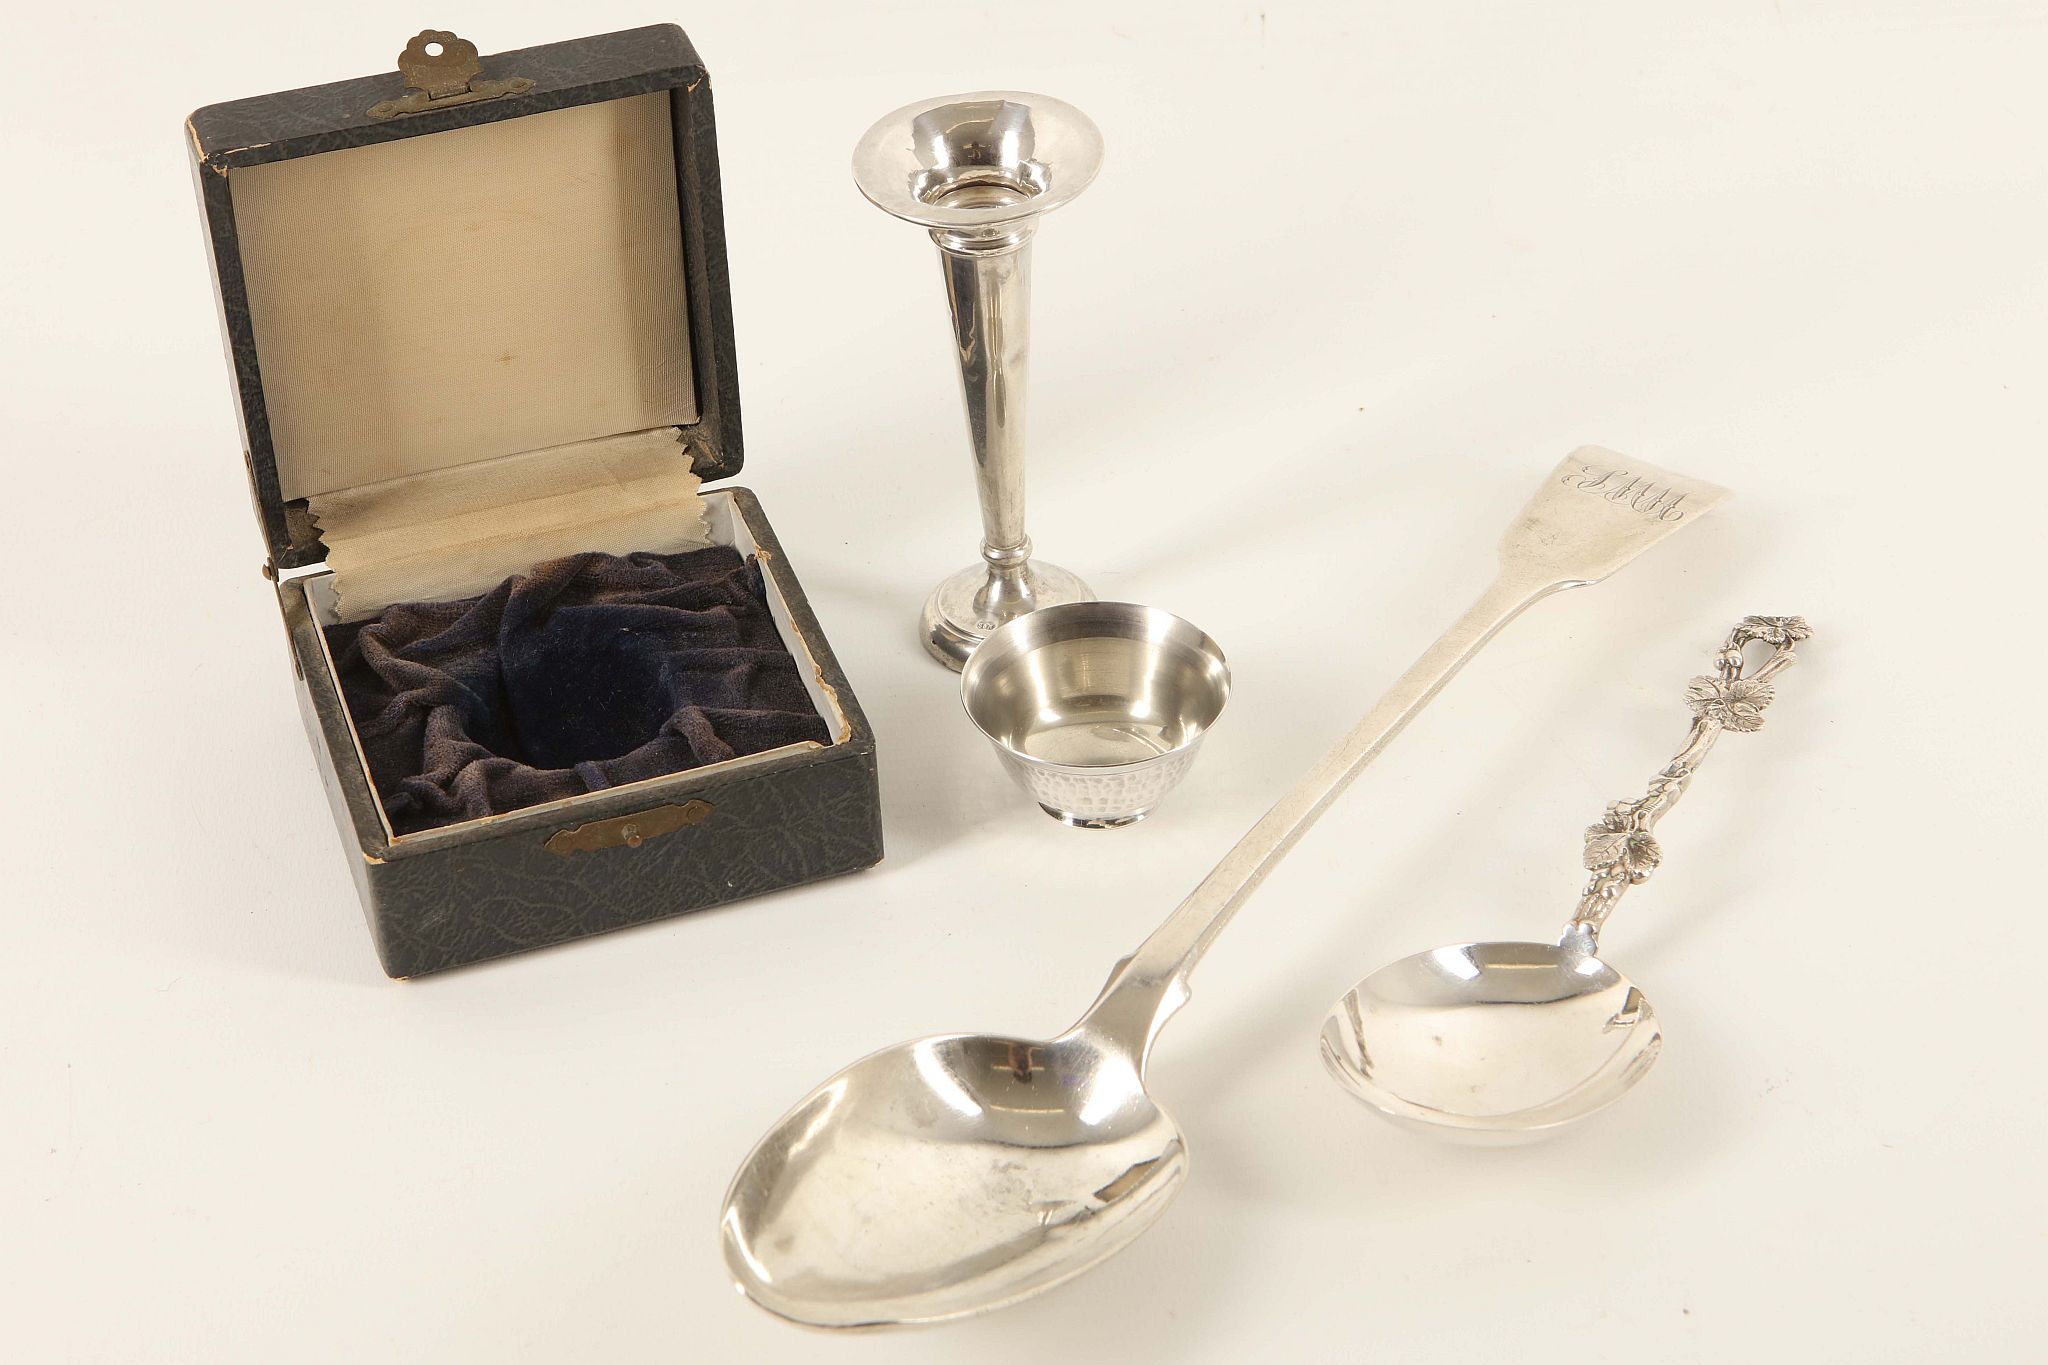 A Georgian silver basting spoon, London 1821, sold with a trumpet bud vase, a 17th Century Dutch